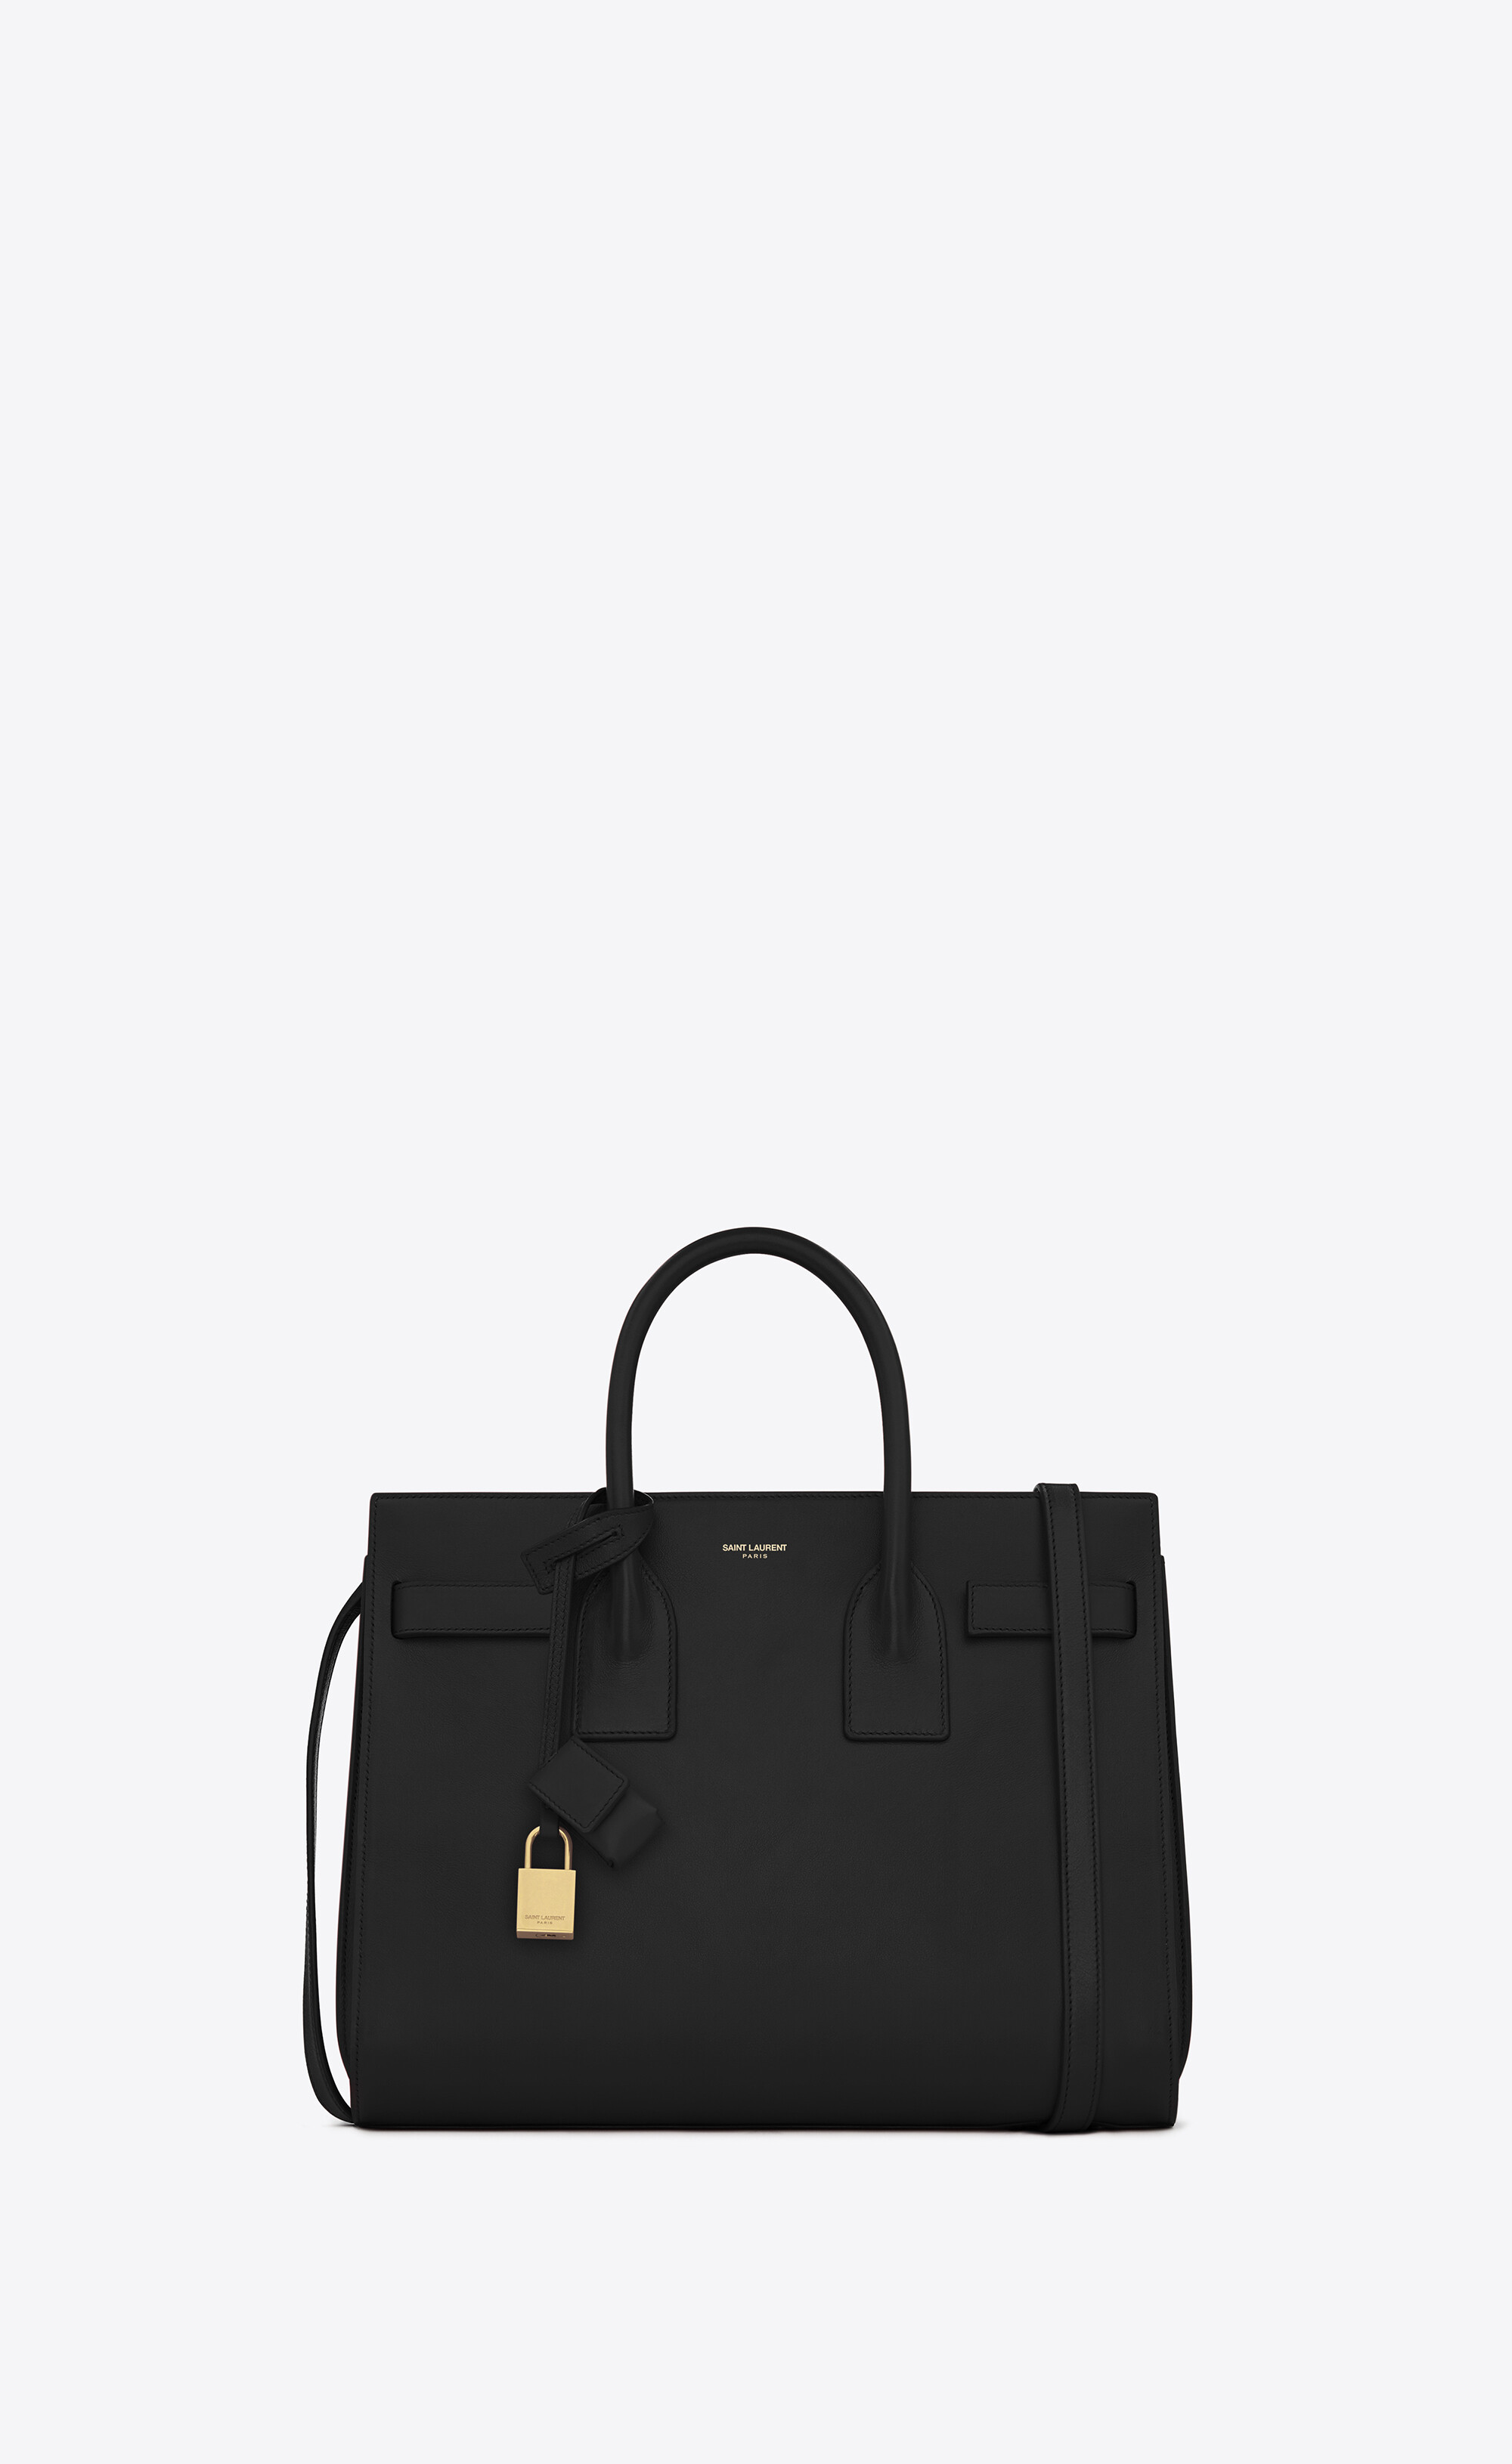 Saint Laurent Sac De Jour Nano In Smooth Leather Black in Smooth Calfskin  Leather with Bronze-tone - US